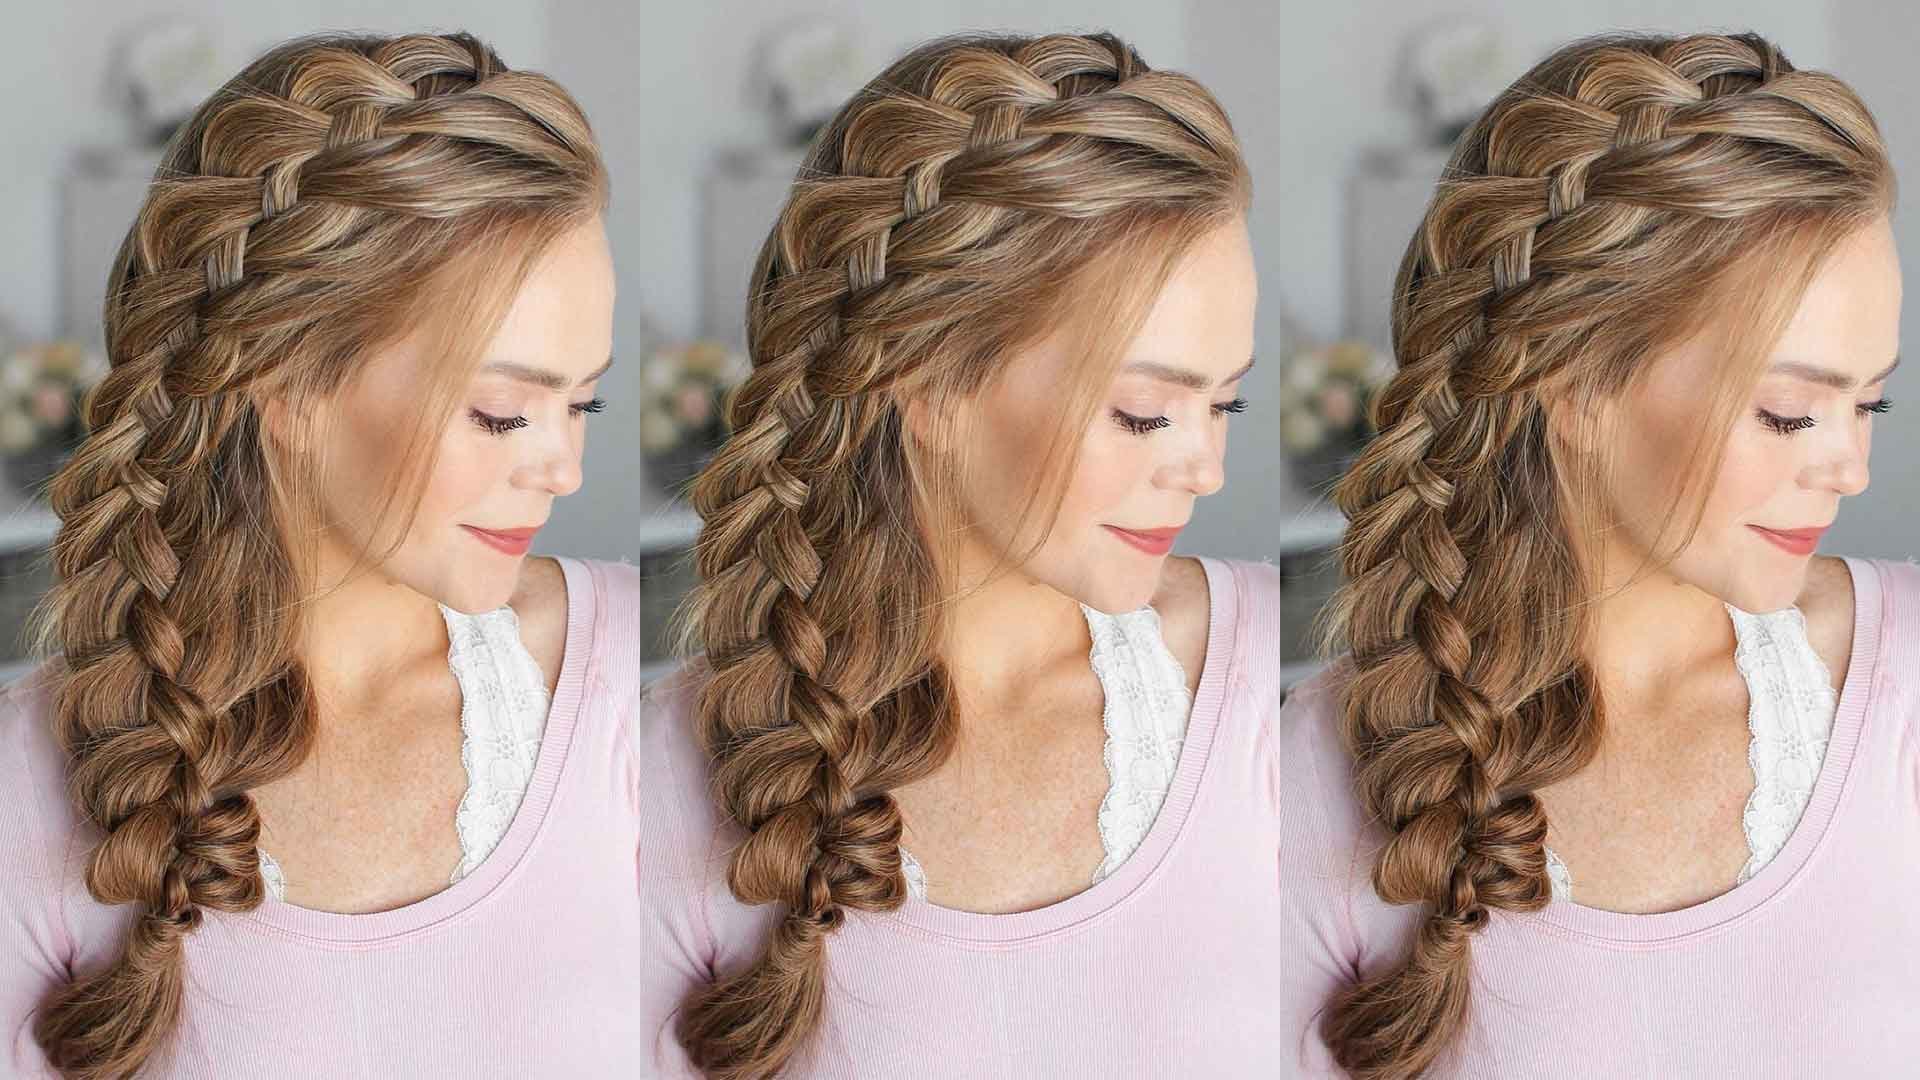 The Dutch Braid with a Twist – Most Feminine Hairstyle Ever